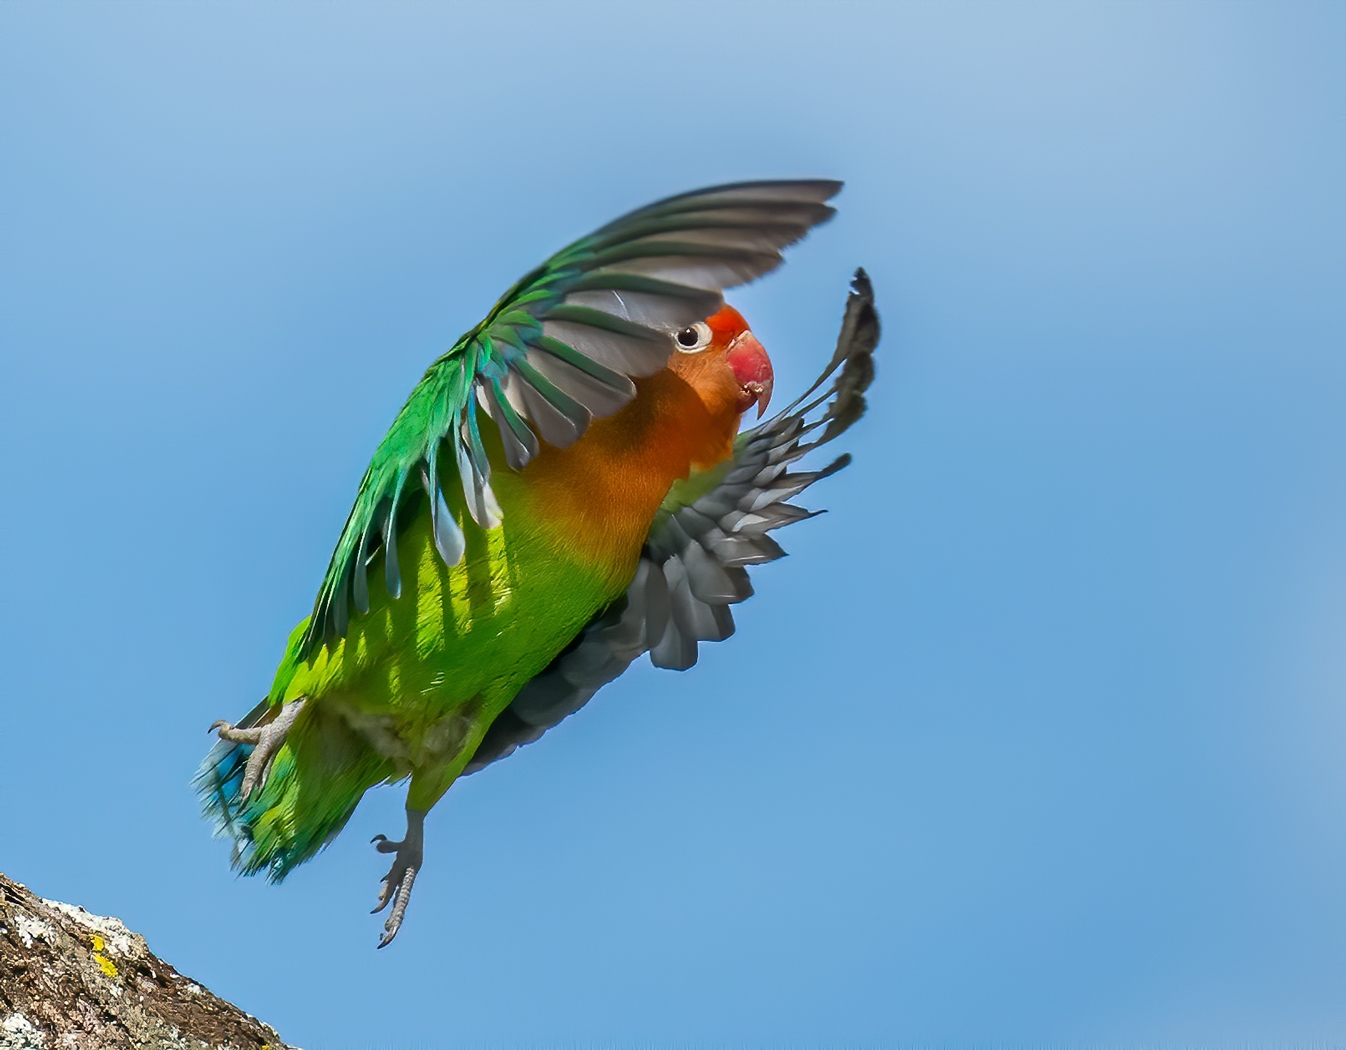 Lovebird - Taking the leap! by Susan Case